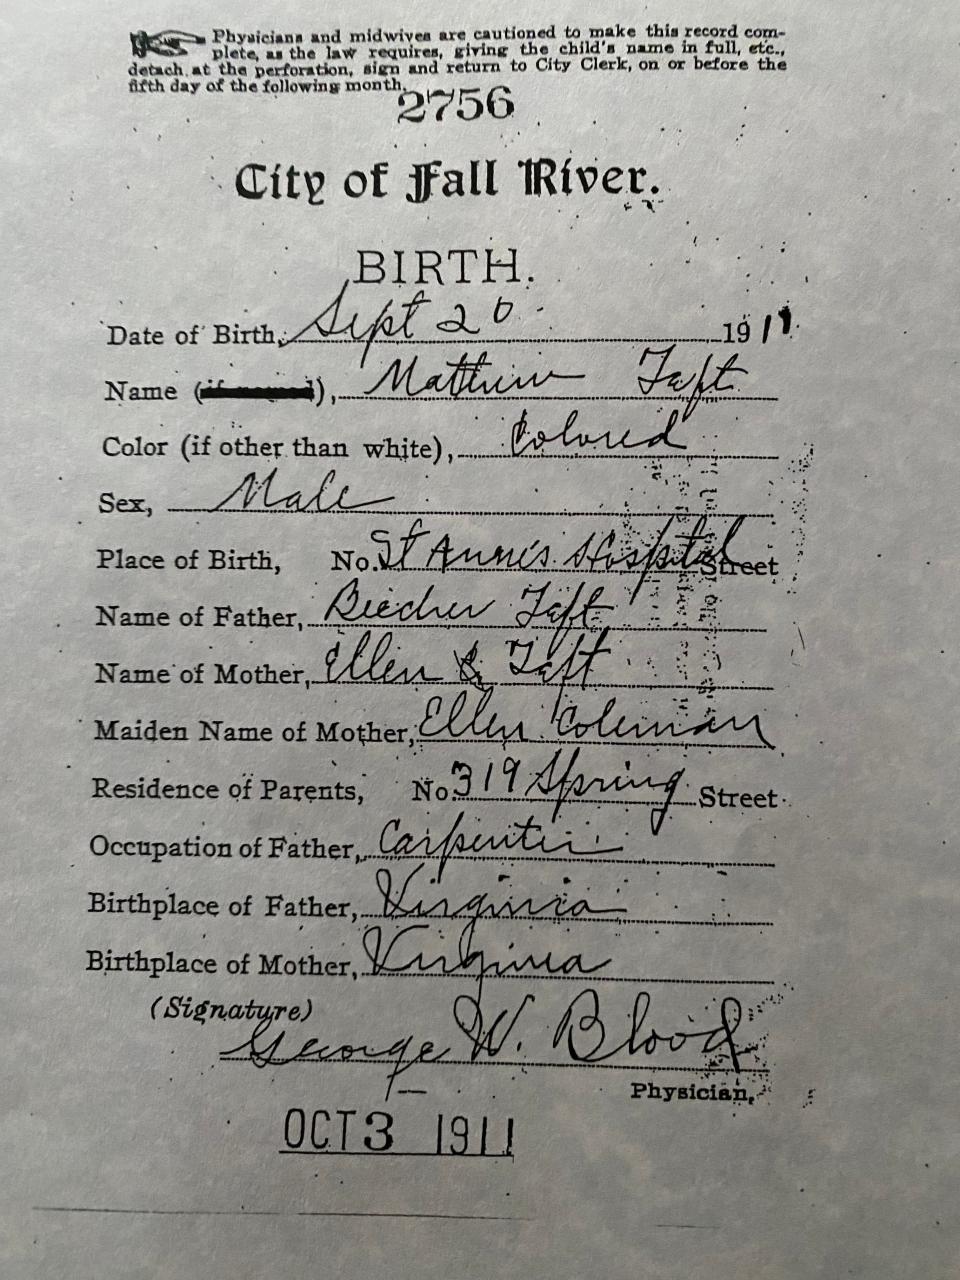 Herbert Johnson's 1911 birth certificate, under the name "Matthew Taft," shows his race as "Colored."